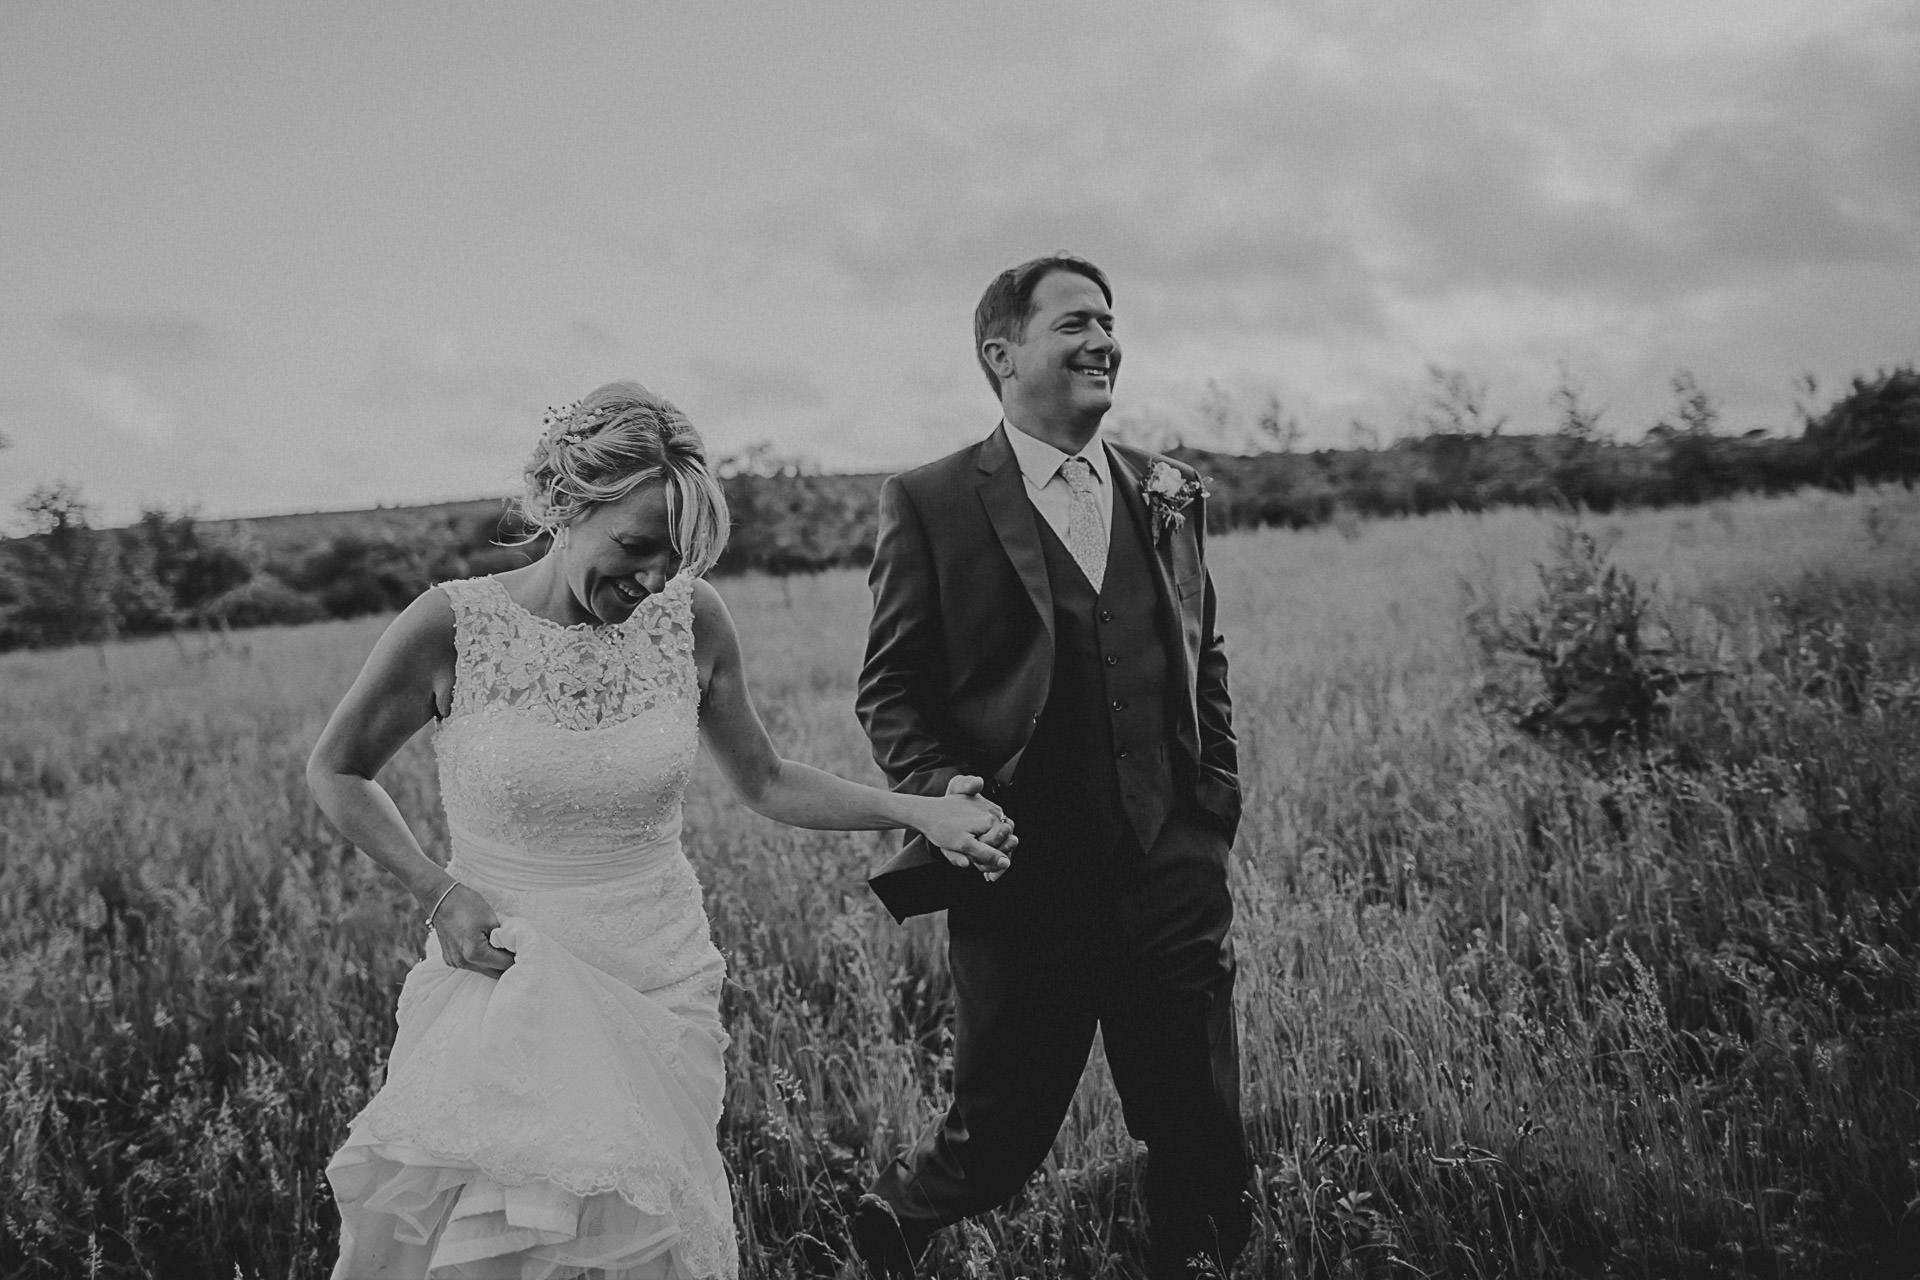 Wedding Photographer in Cornwall shooting at Knightor Winery - St Austell